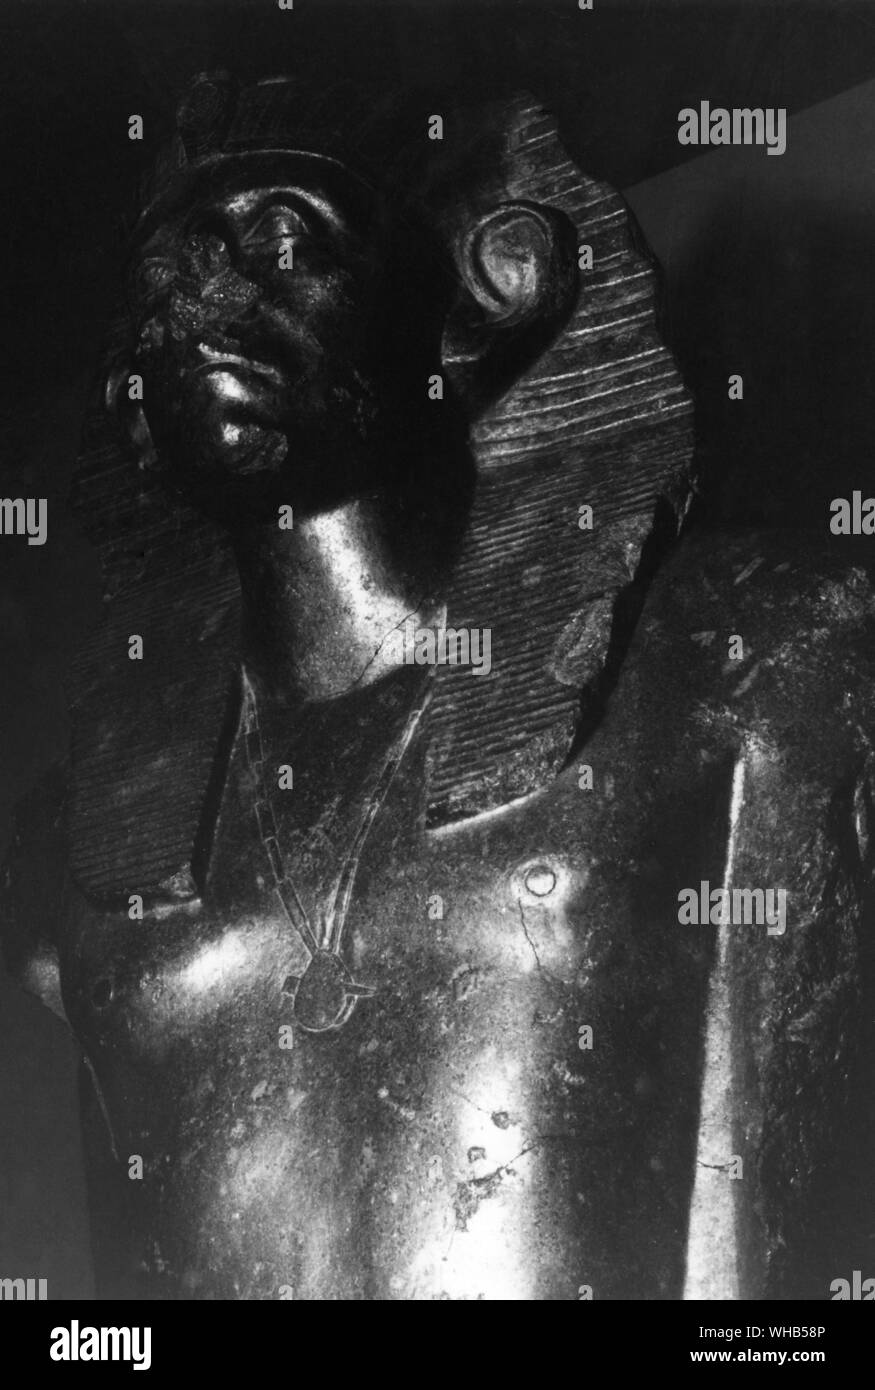 Black graphite statue of Khakhaure Senusret III (also written as Senwosret III or Sesostris III) - a pharaoh of Egypt. He ruled from 1878 BC to 1839 BC, and was the fifth monarch of the Twelfth Dynasty of the Middle Kingdom. He was a Great Pharaoh of the twelfth Dynasty and is supposed to be the most powerful Egyptian ruler of this time. For this, he is regarded as one of the sources for the legend about Sesostris.. Stock Photo